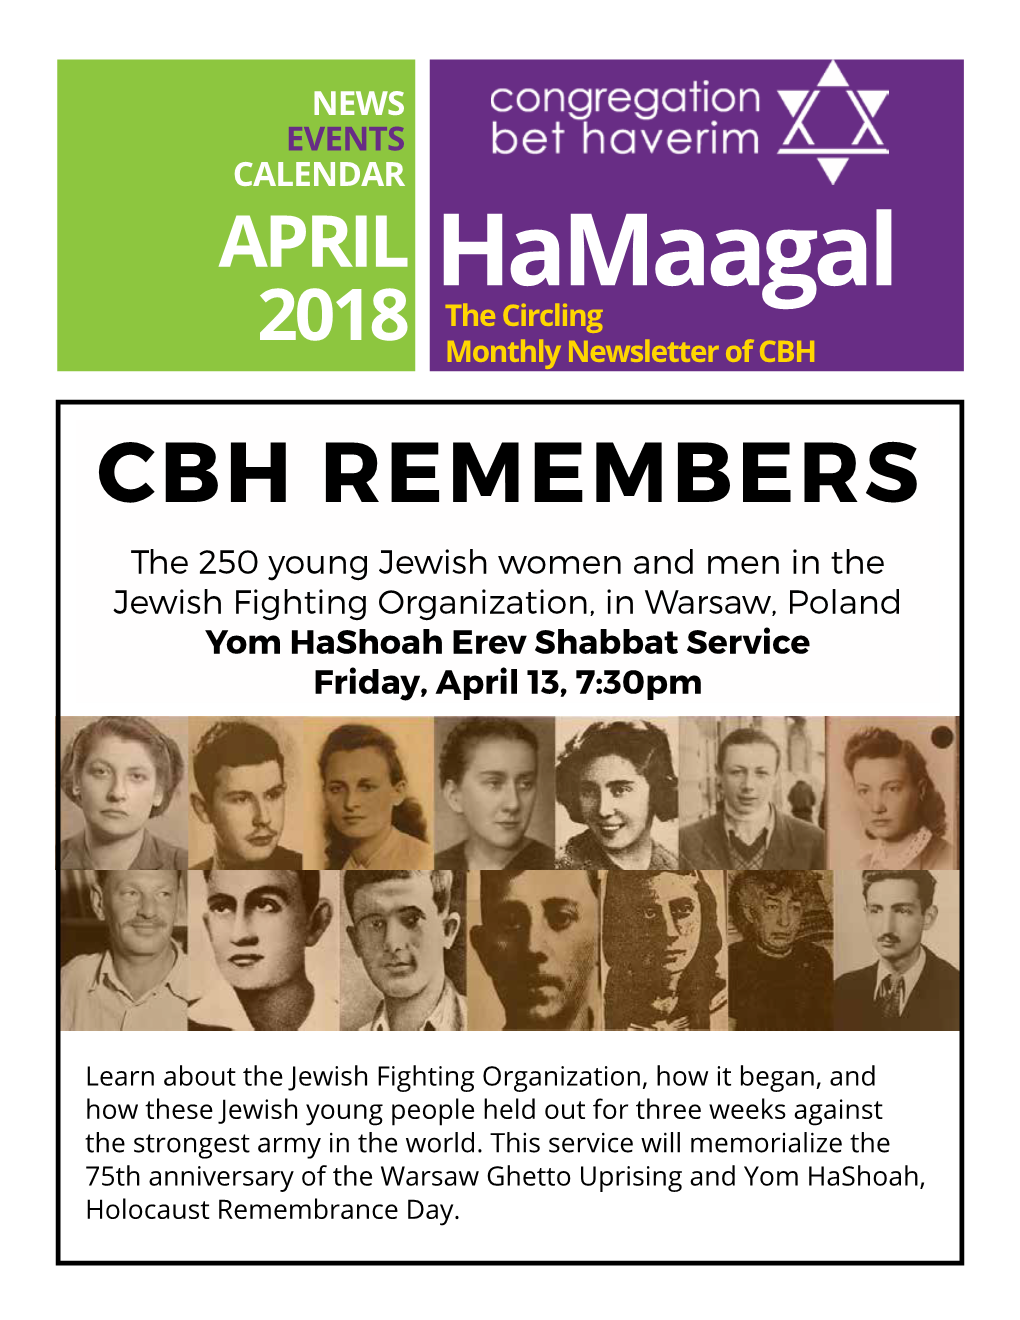 Hamaagal the Circling 2018 Monthly Newsletter of CBH